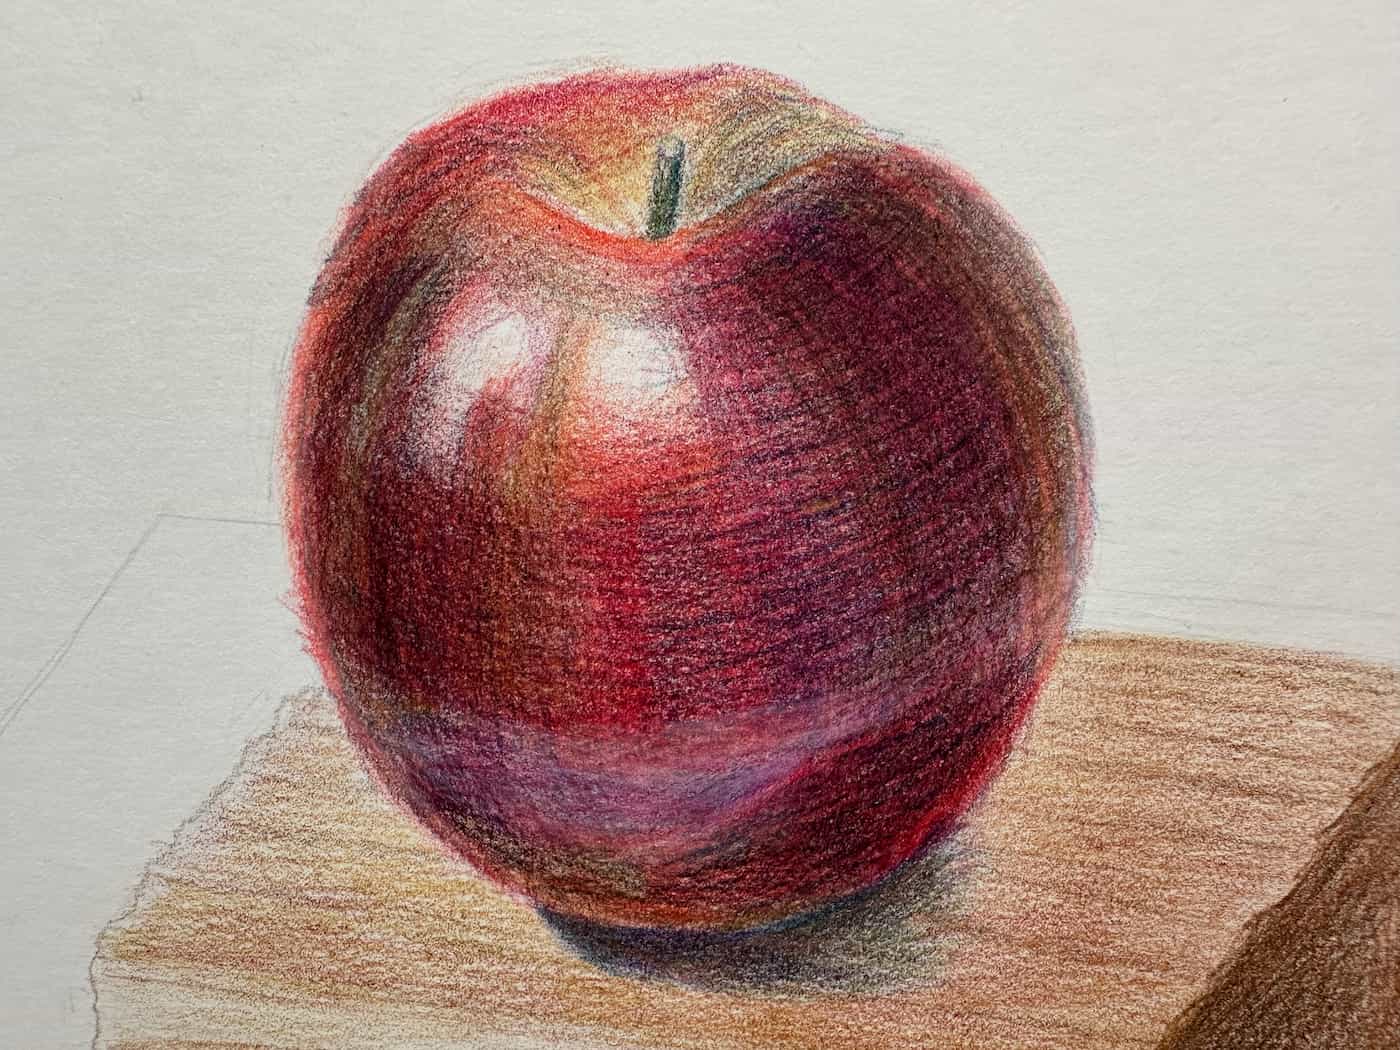 Pencil drawing of a red apple sitting on top of a wooden block.